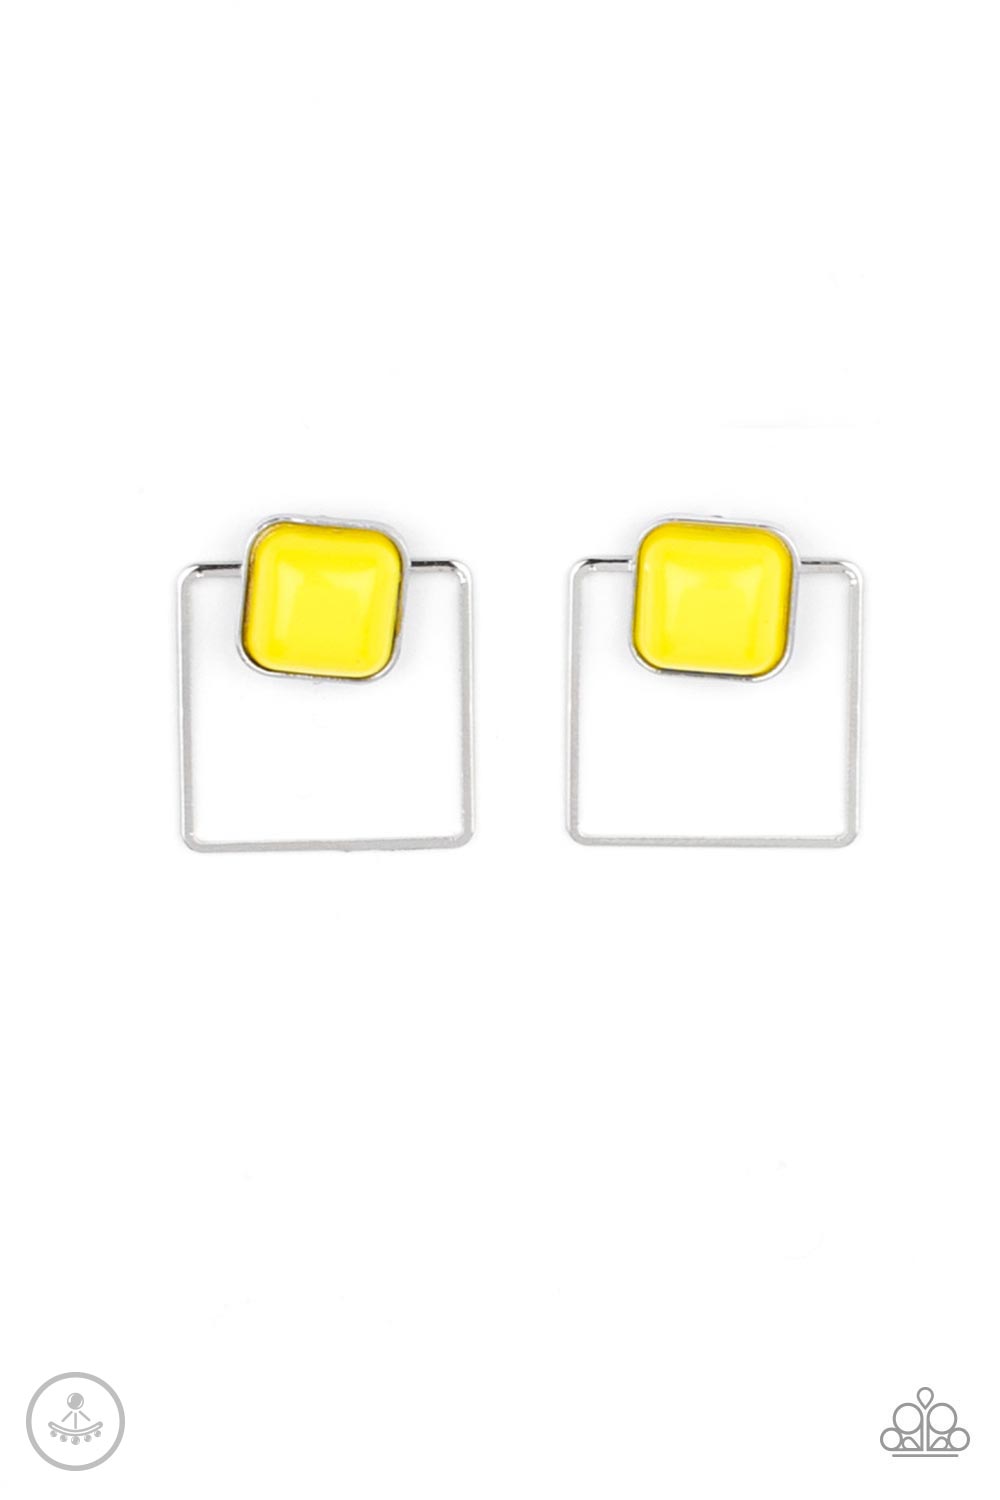 PRE-ORDER - Paparazzi FLAIR and Square - Yellow - Double Sided Earrings - $5 Jewelry with Ashley Swint